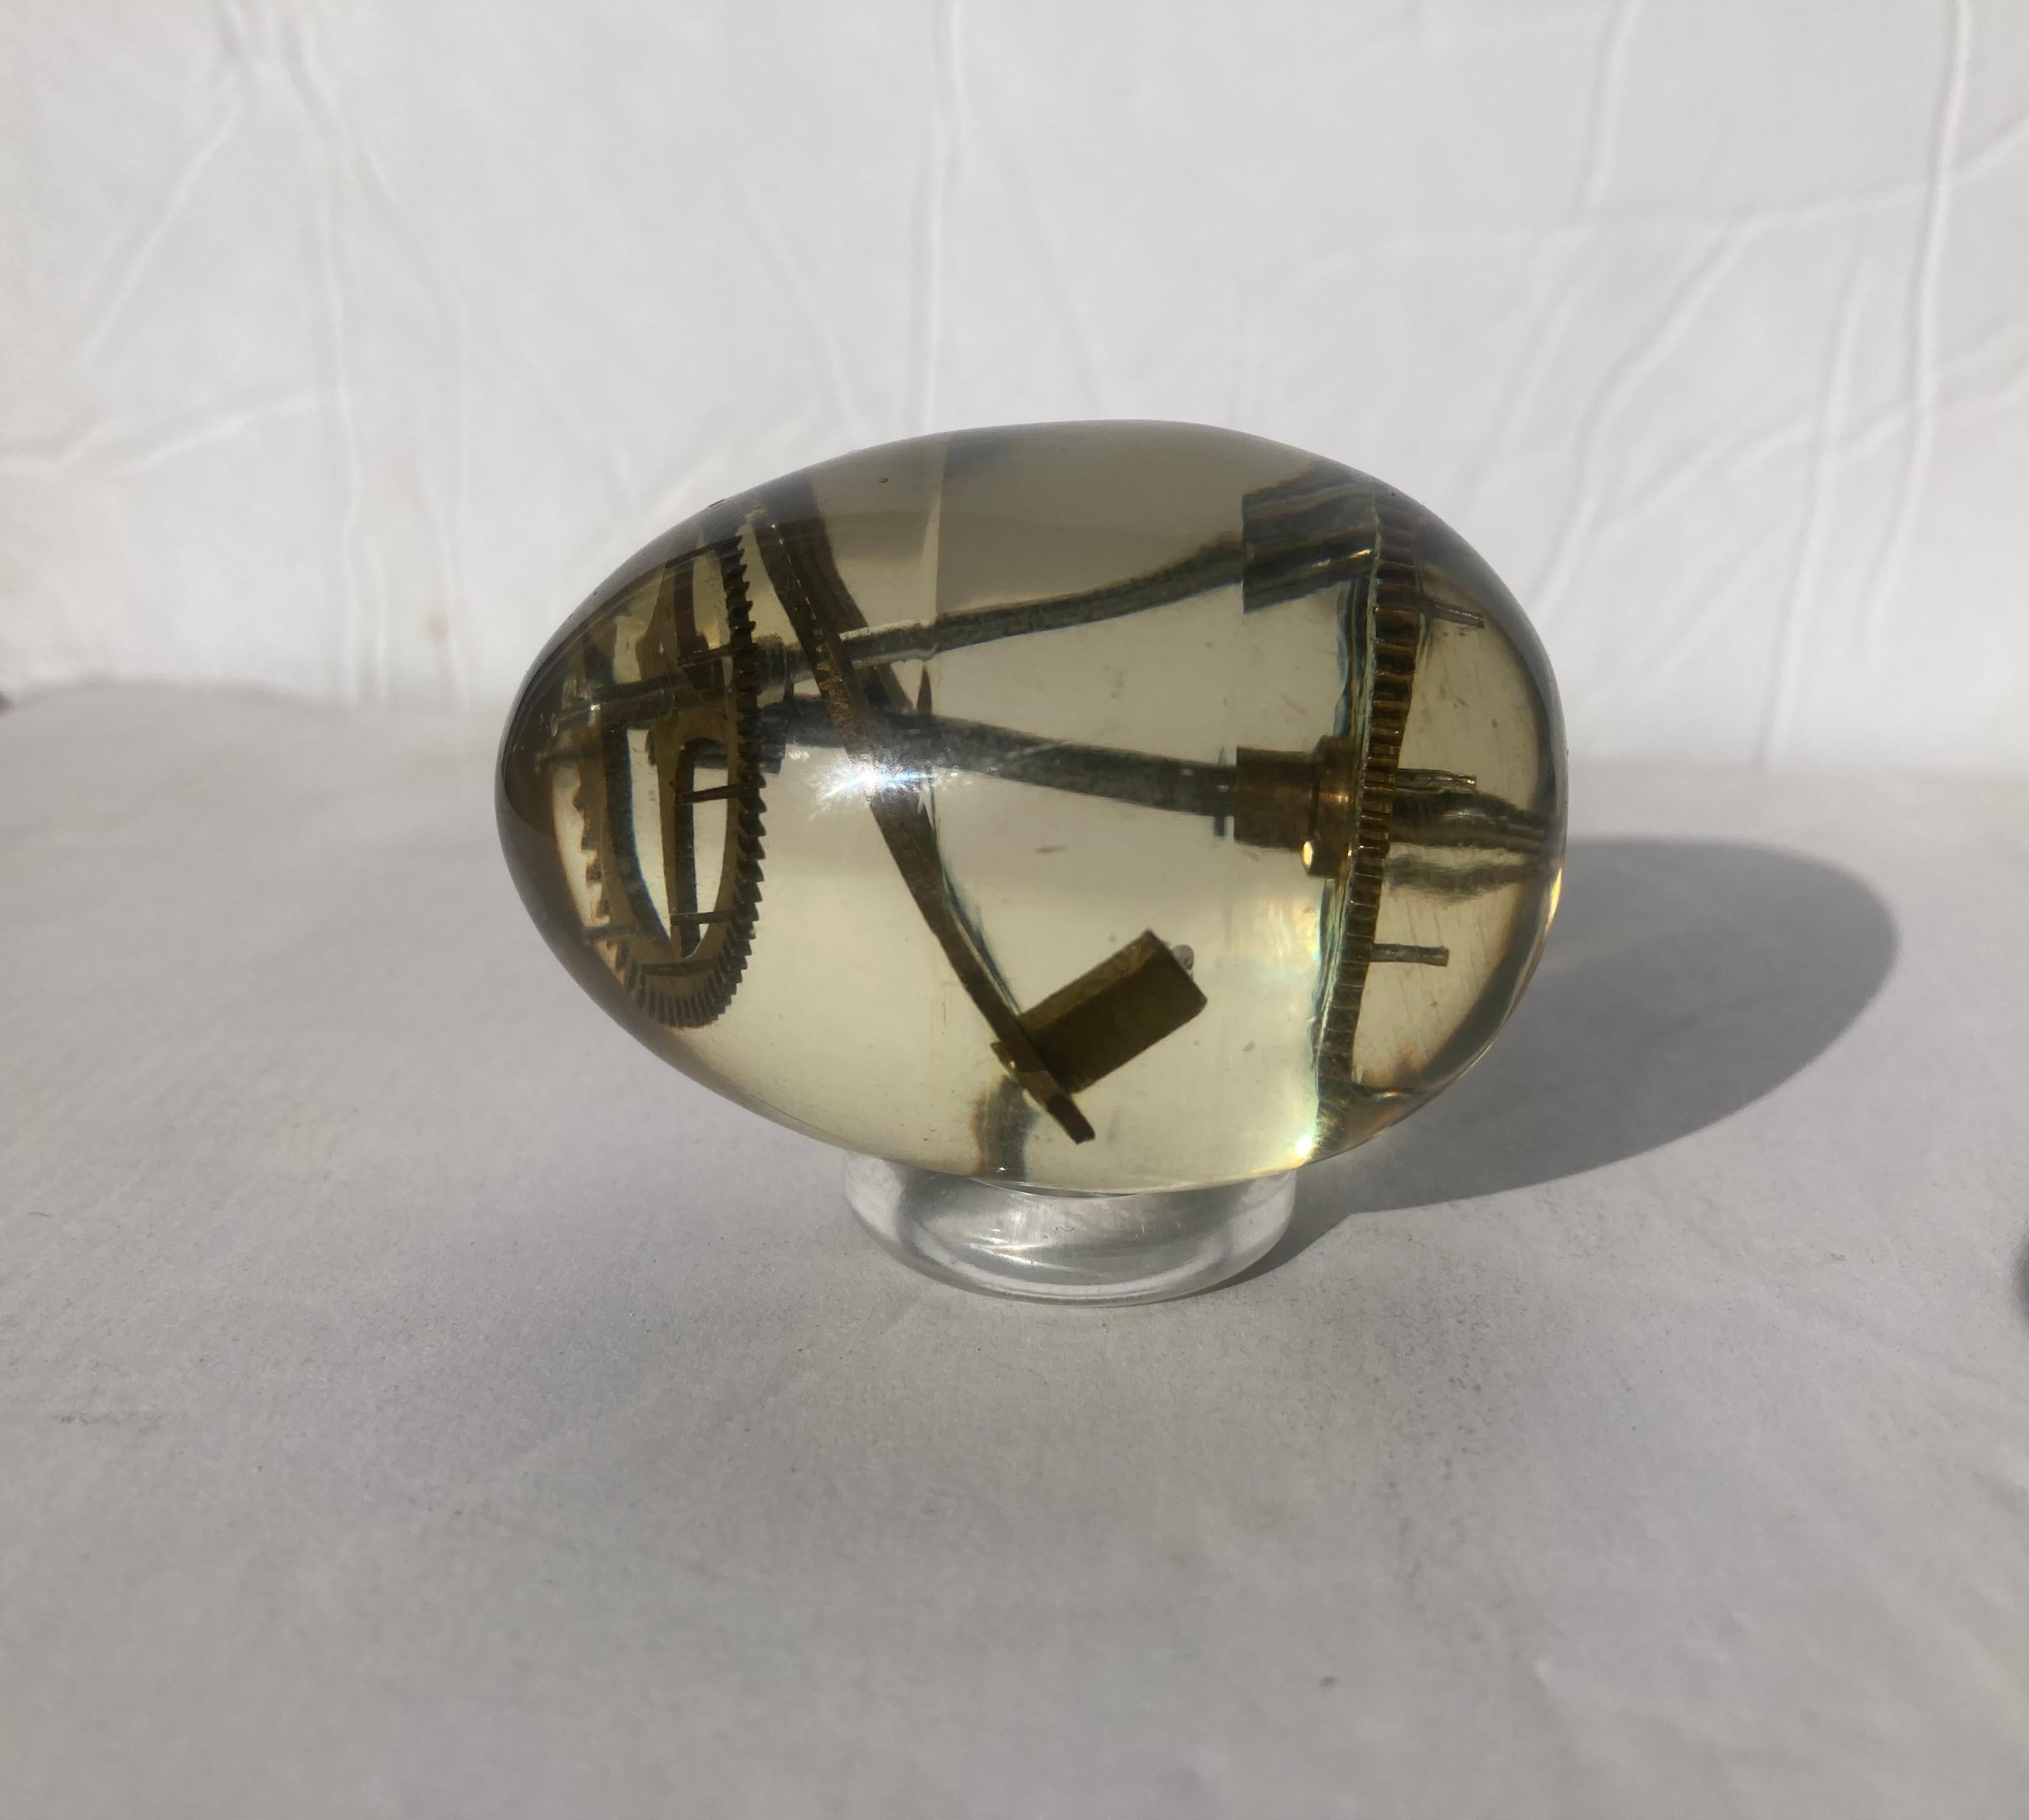 Beautiful resin egg with clock parts inside, remind us to some the resin Oierre Giraudon , the resin is coloring with age.